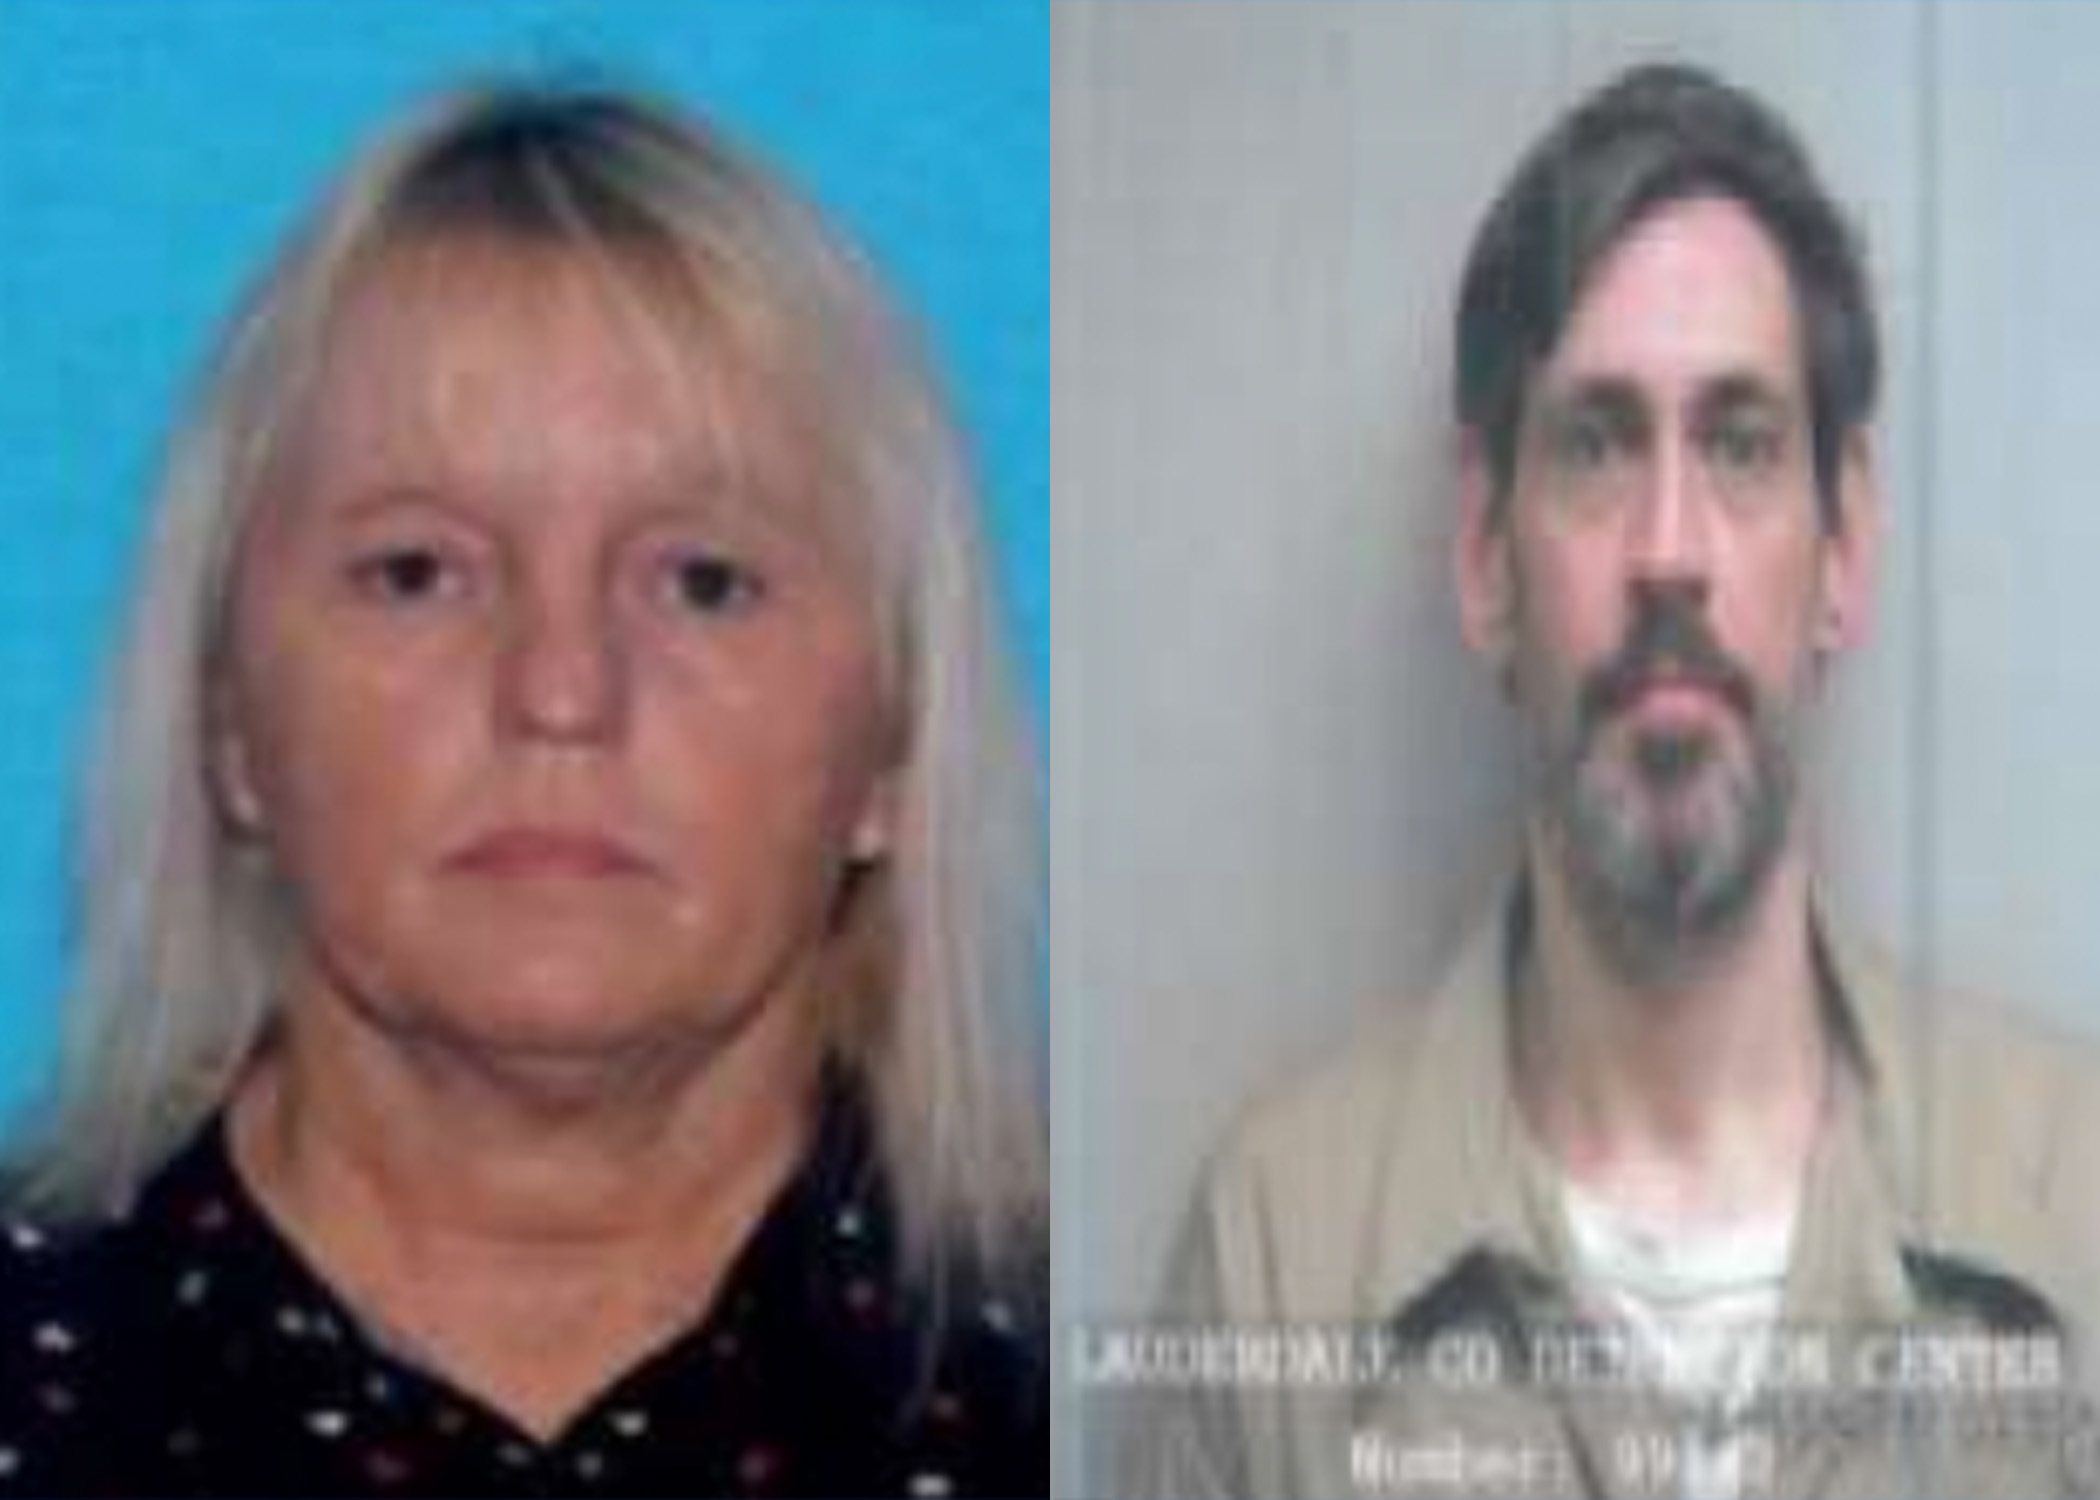 Search continues for missing correctional officer and inmate The